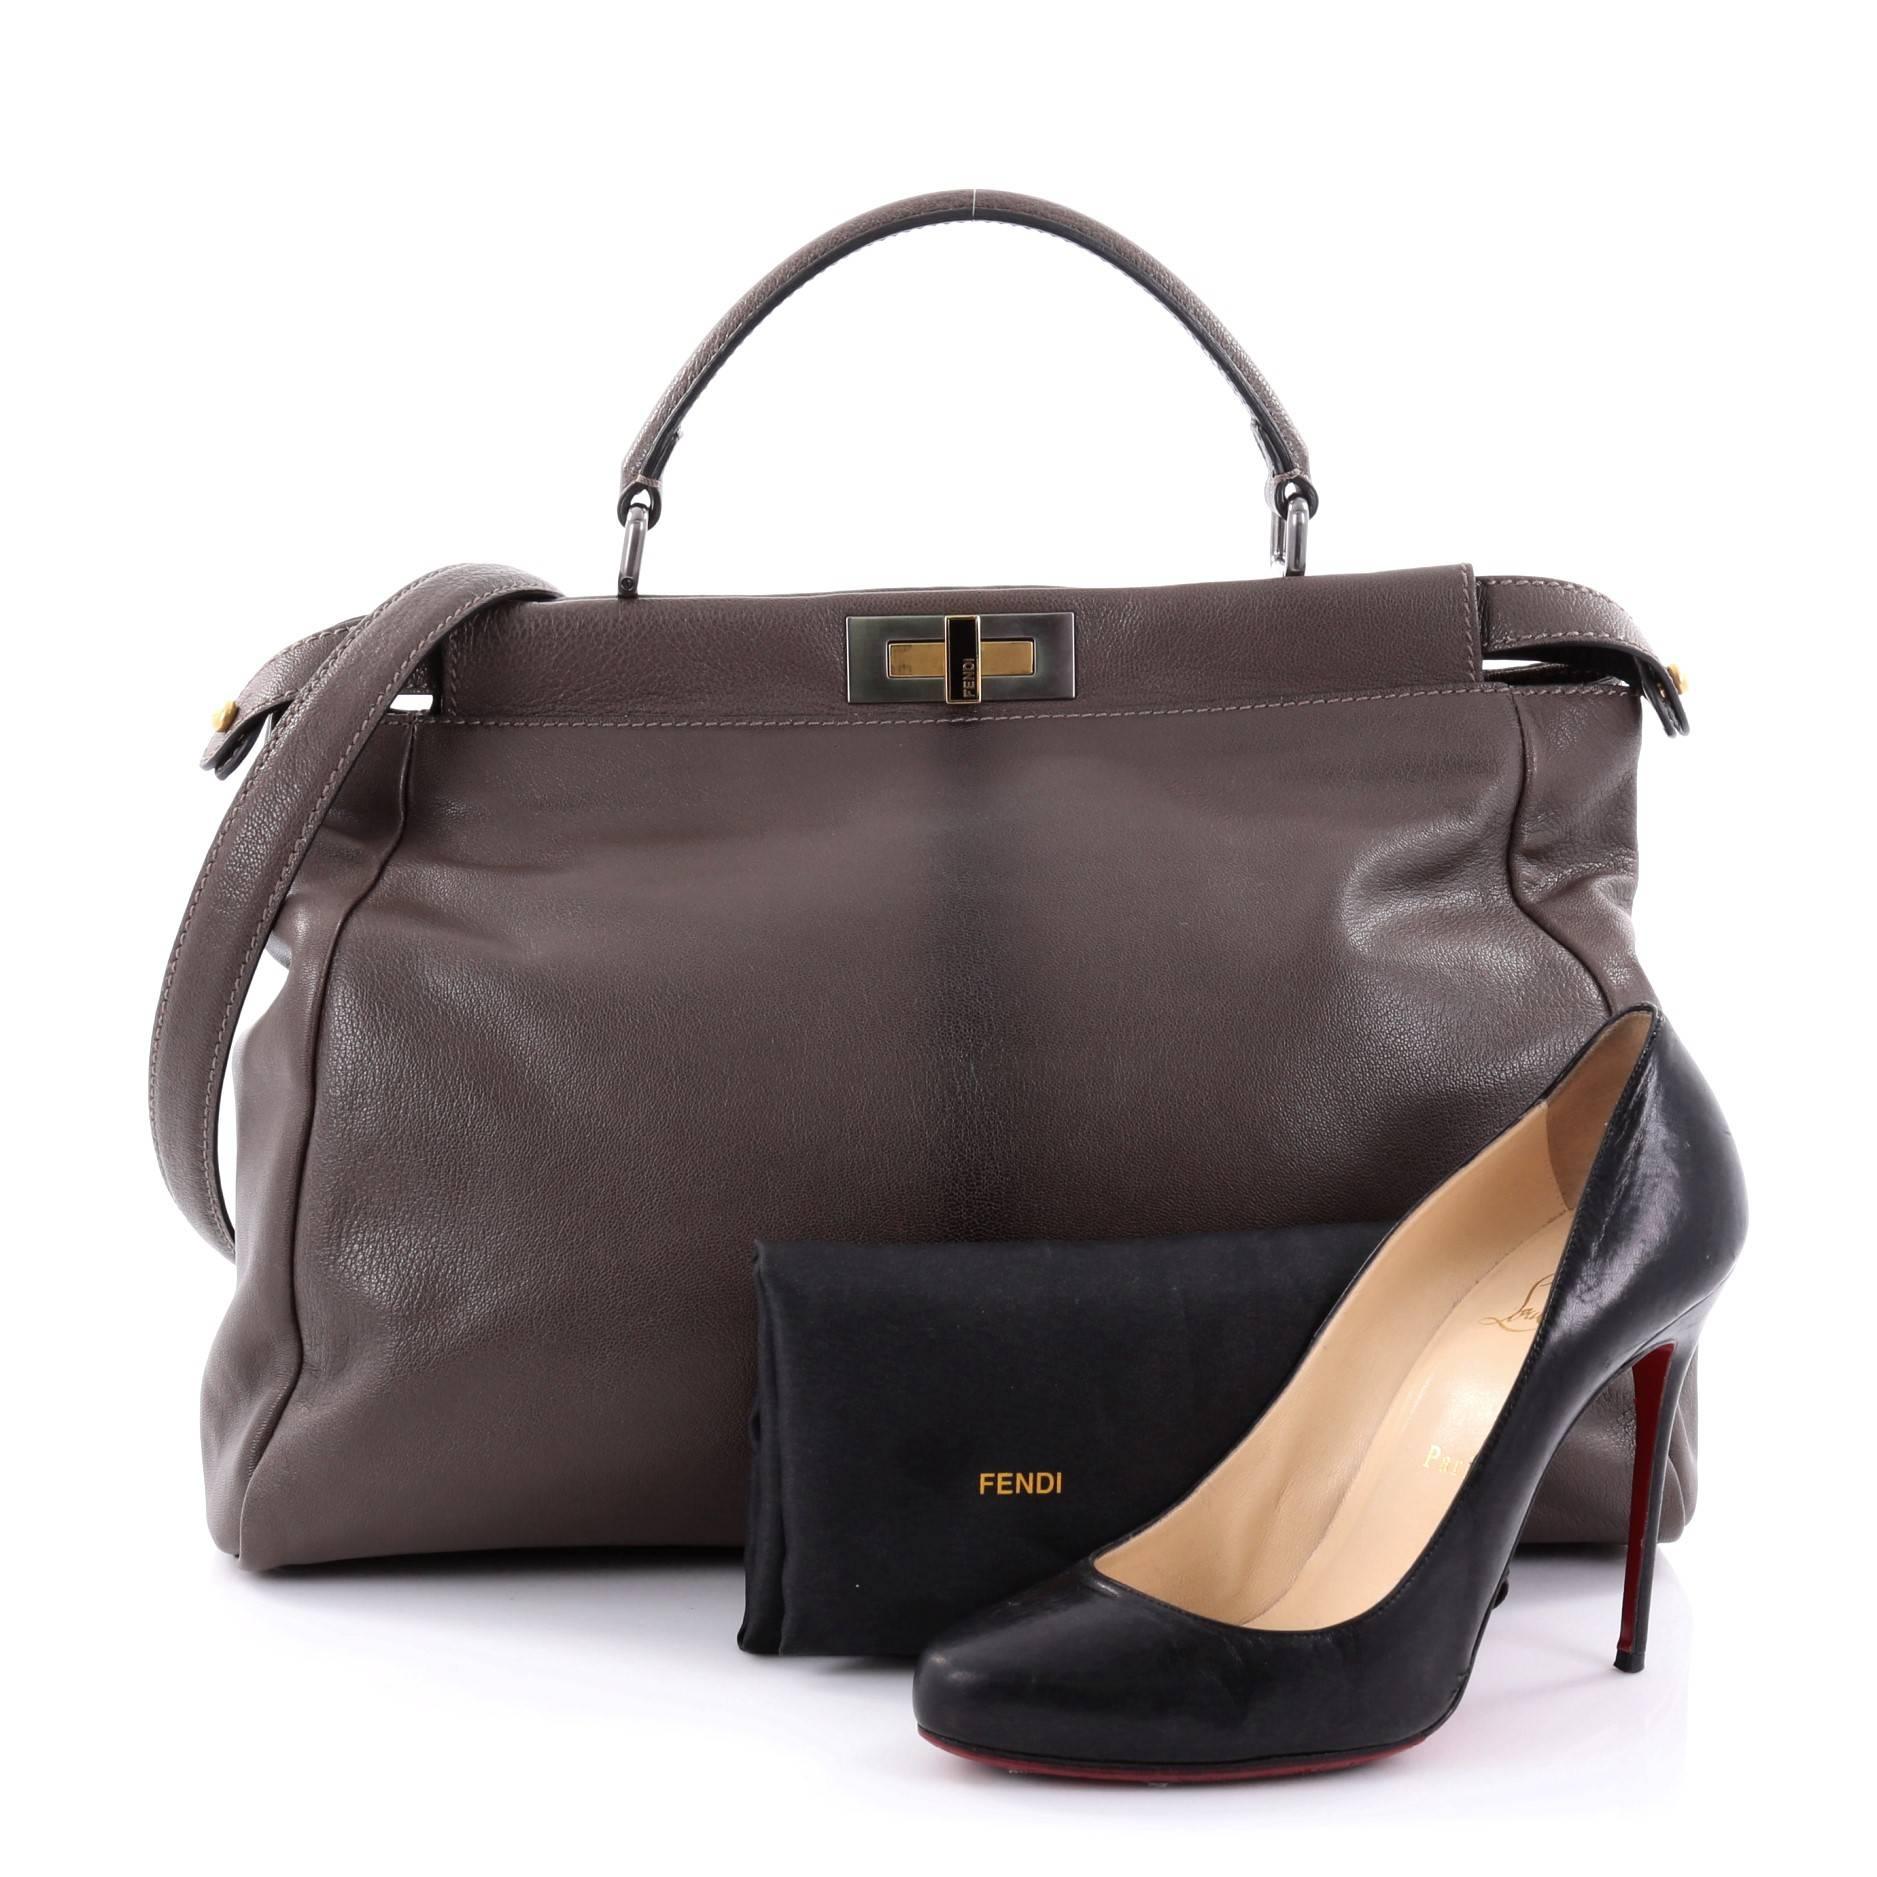 This authentic Fendi Peekaboo Handbag Leather Large is one of Fendi's best known designs exuding a luxurious yet minimalist appearance. Crafted in taupe leather, this versatile and stylish satchel features a flat leather top handle, protective base